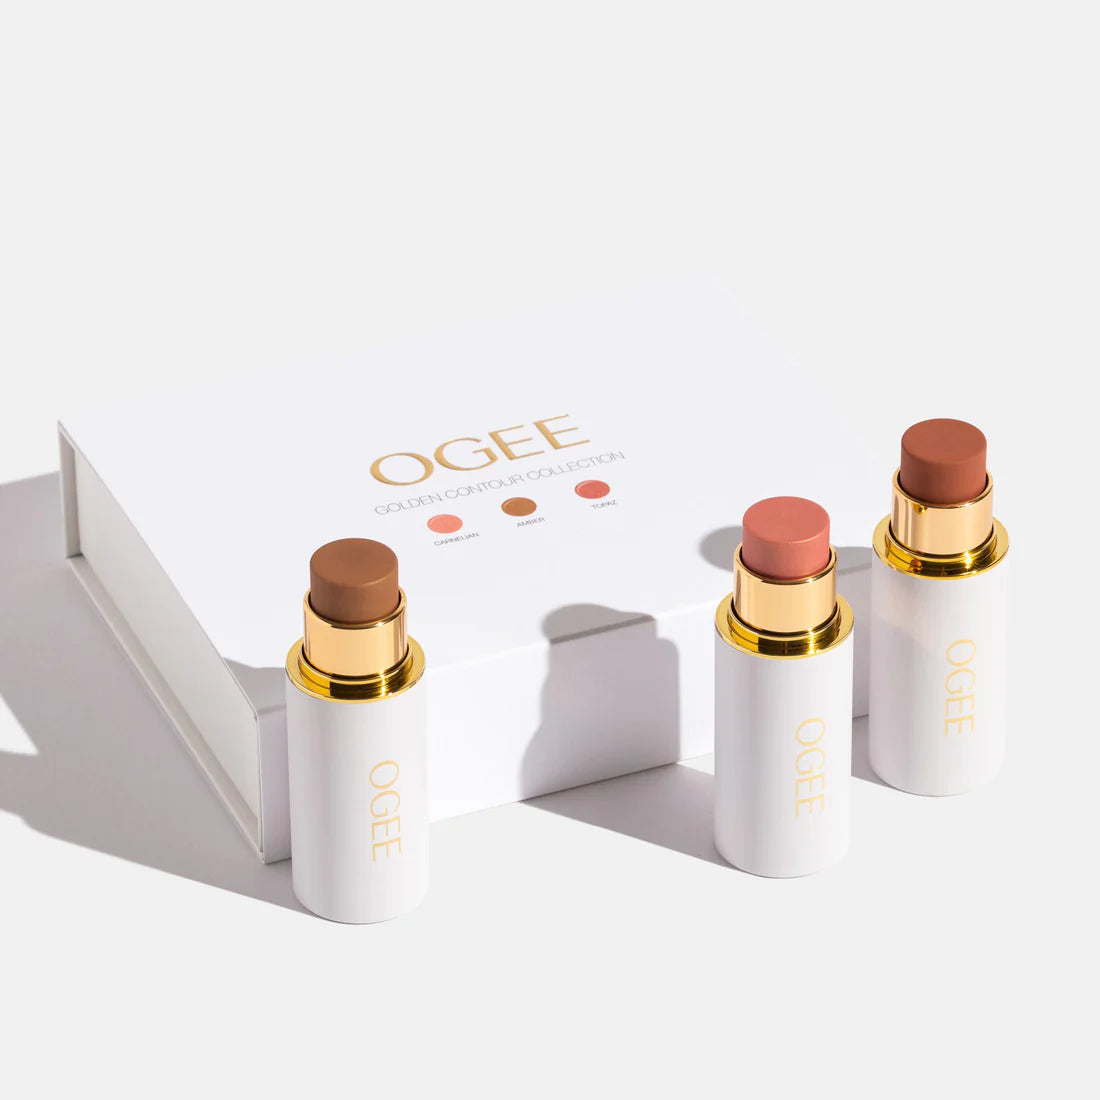 Ogee Face Stick Crystal Collection Trio - Contour Stick Makeup Collection -  Certified Organic Contour Palette - Includes Bronzer Stick, Blush Stick 